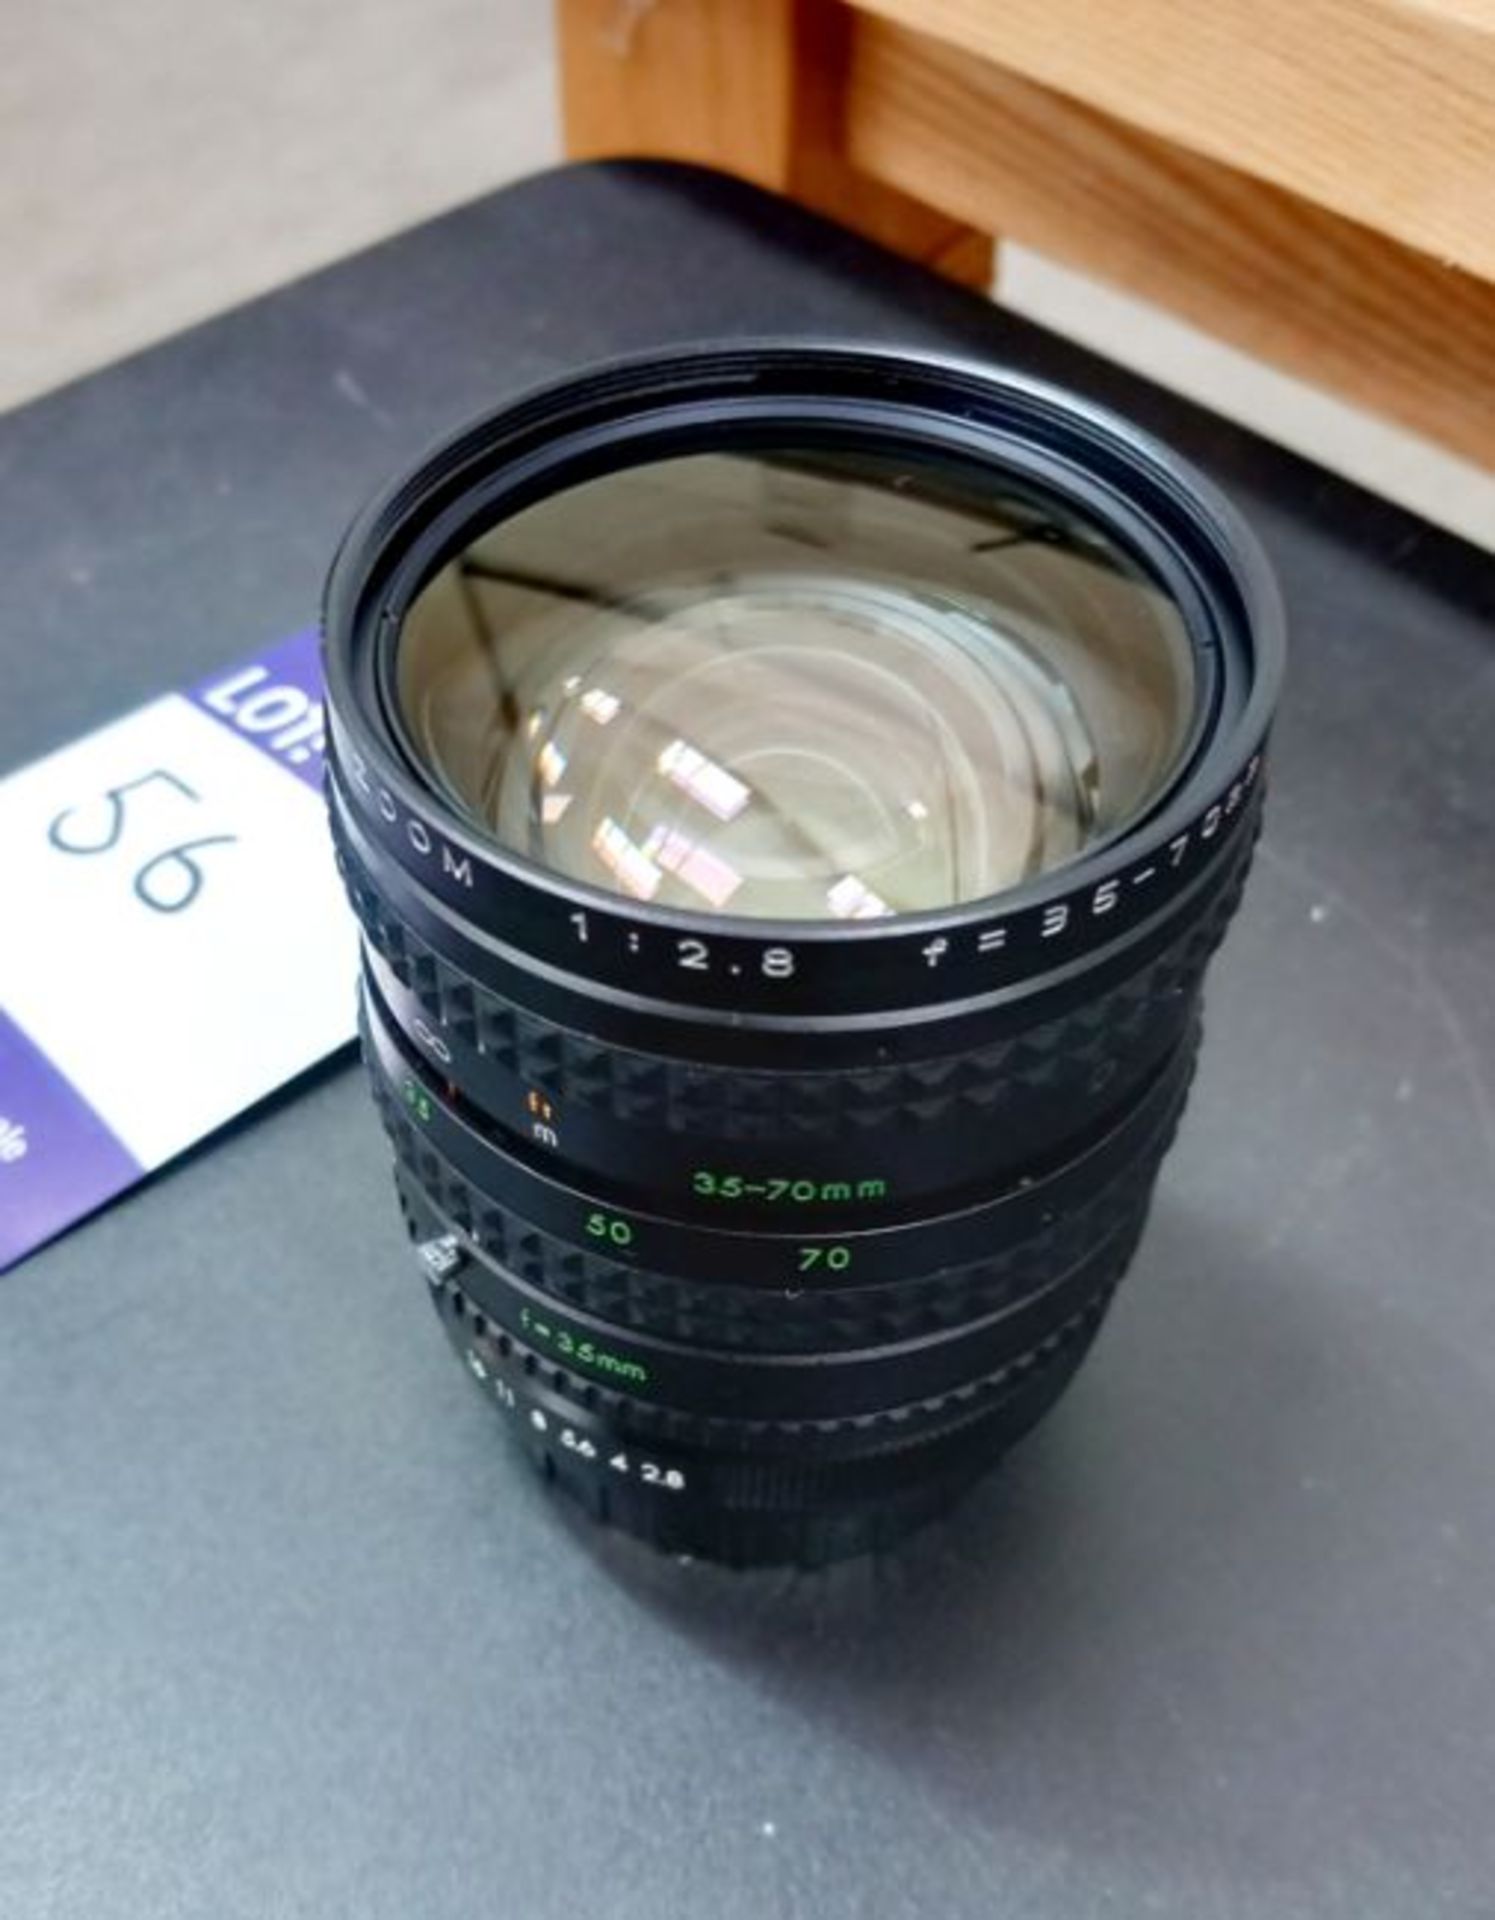 Pentax 50-200mm F.4 - 5.6 ED & Makinon 35-70mm F2.8 as well as Canon EOS350D & Canon EOS400D - Image 3 of 6